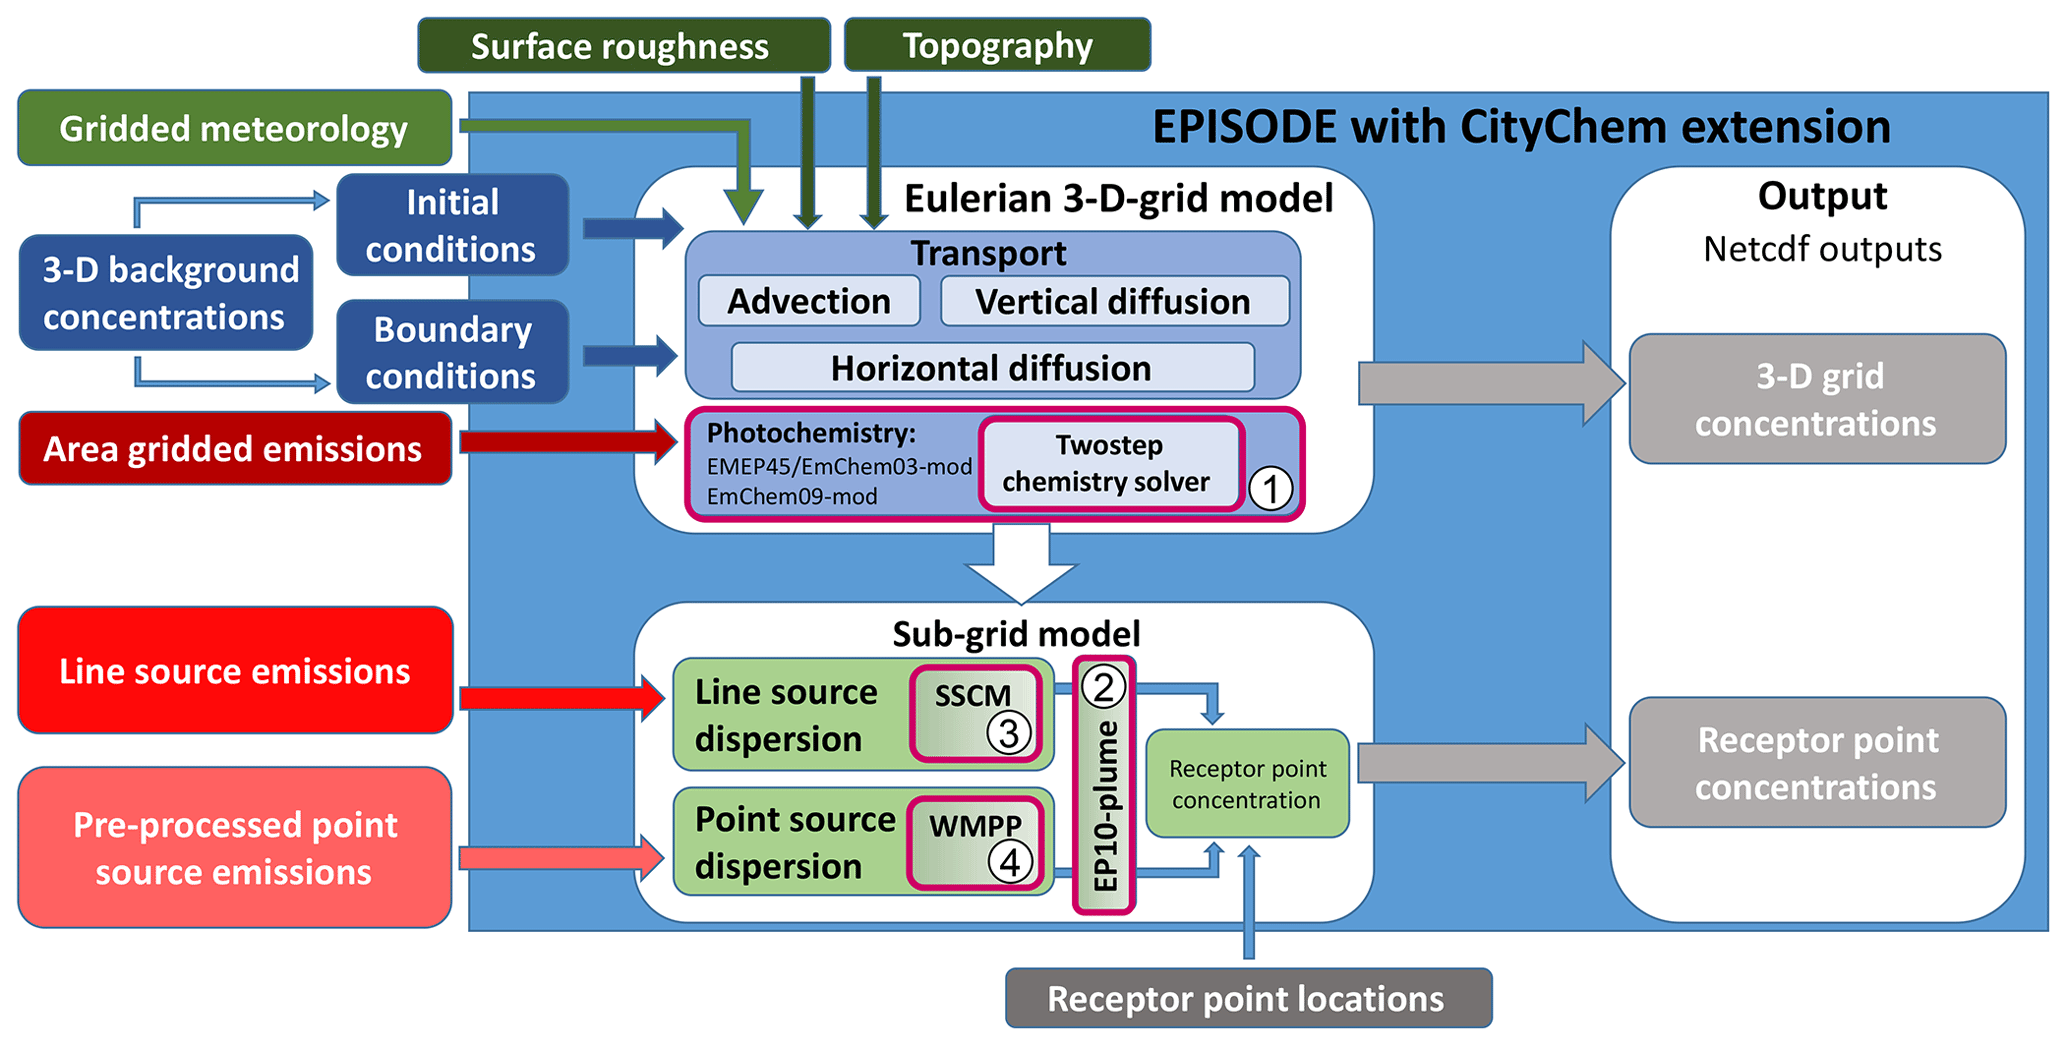 Gmd The Eulerian Urban Dispersion Model Episode Part 2 Extensions To The Source Dispersion And Photochemistry For Episode Citychem V1 2 And Its Application To The City Of Hamburg